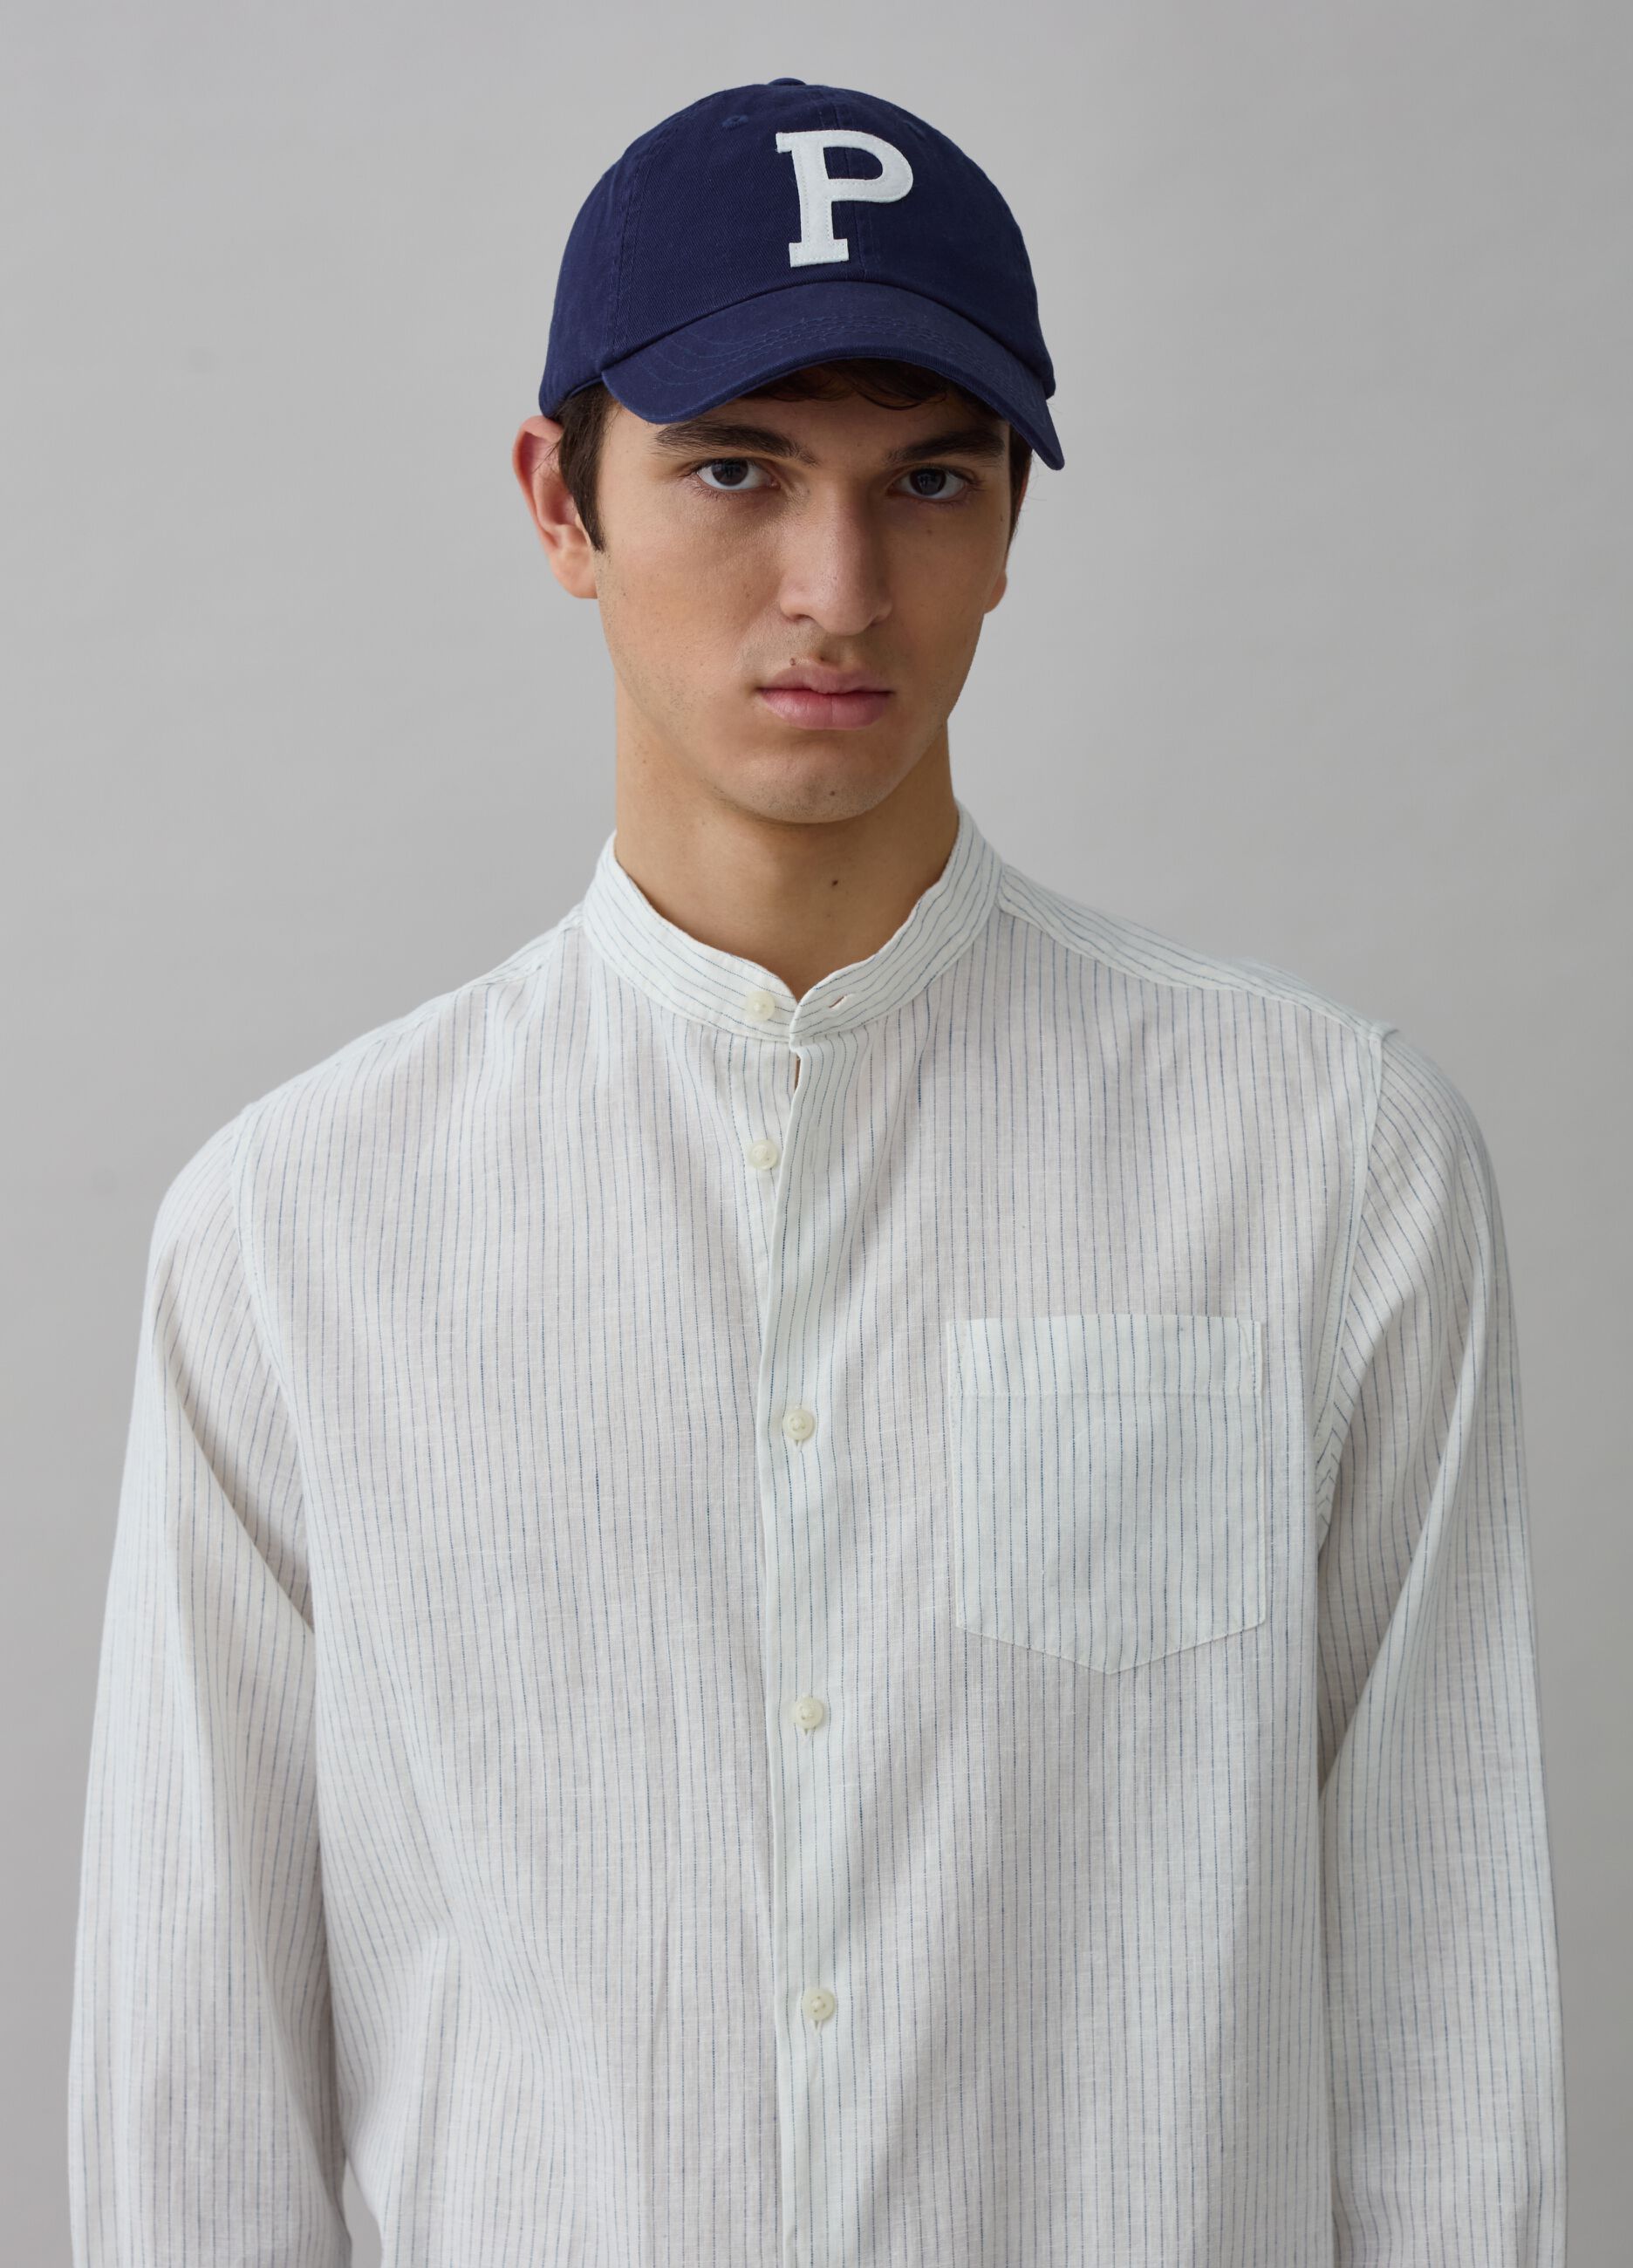 Linen and cotton shirt with thin stripes